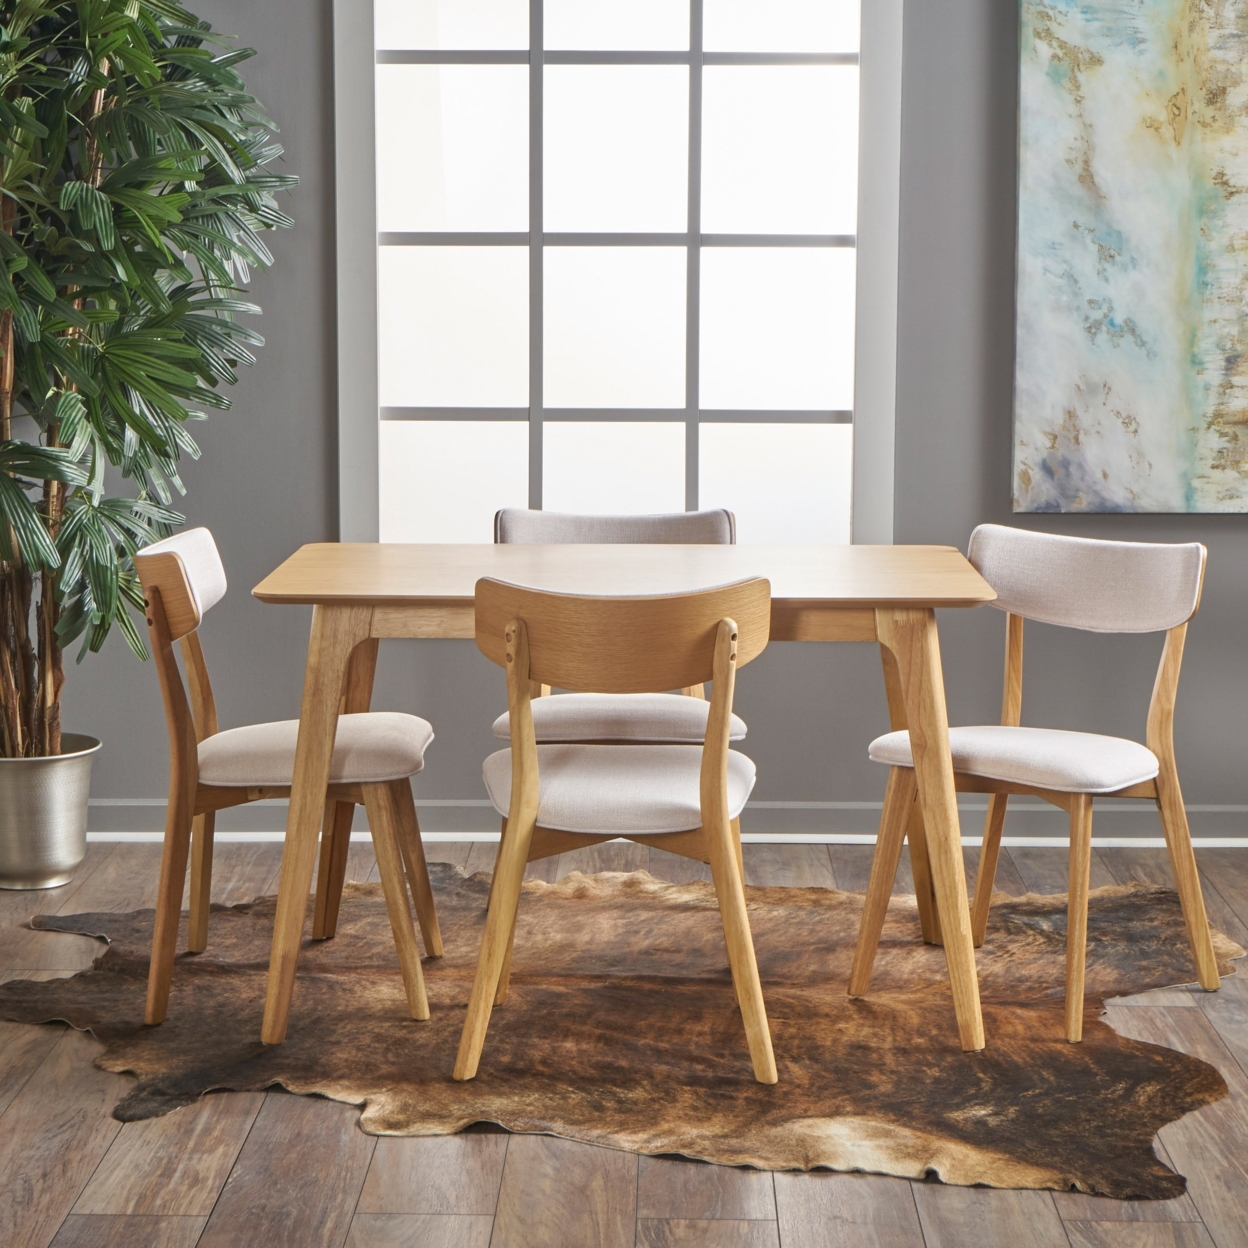 Meanda Mid Century Finished 5 Piece Wood Dining Set With Fabric Chairs - Light Beige